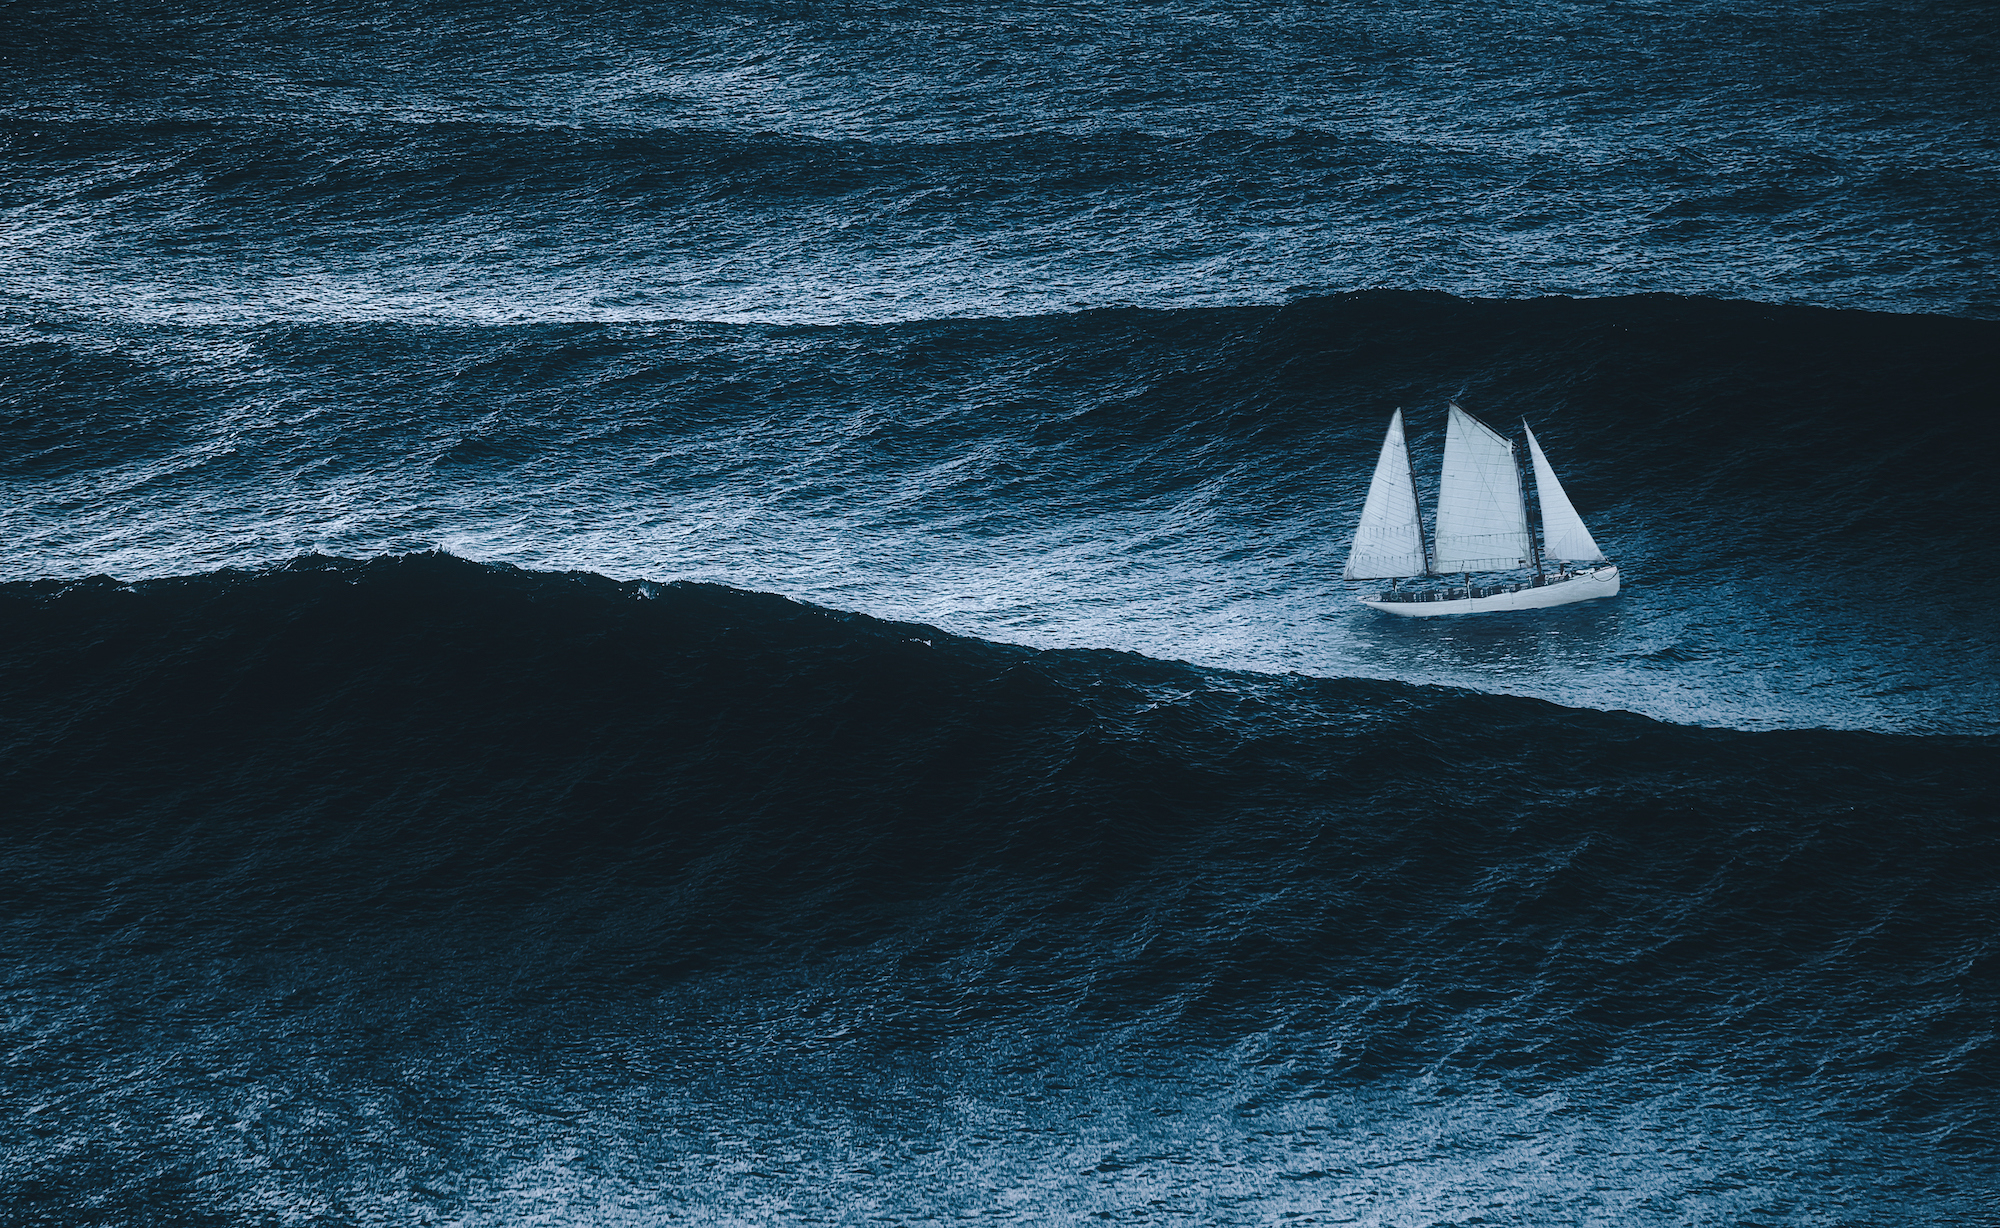 sail boat getting caught between waves